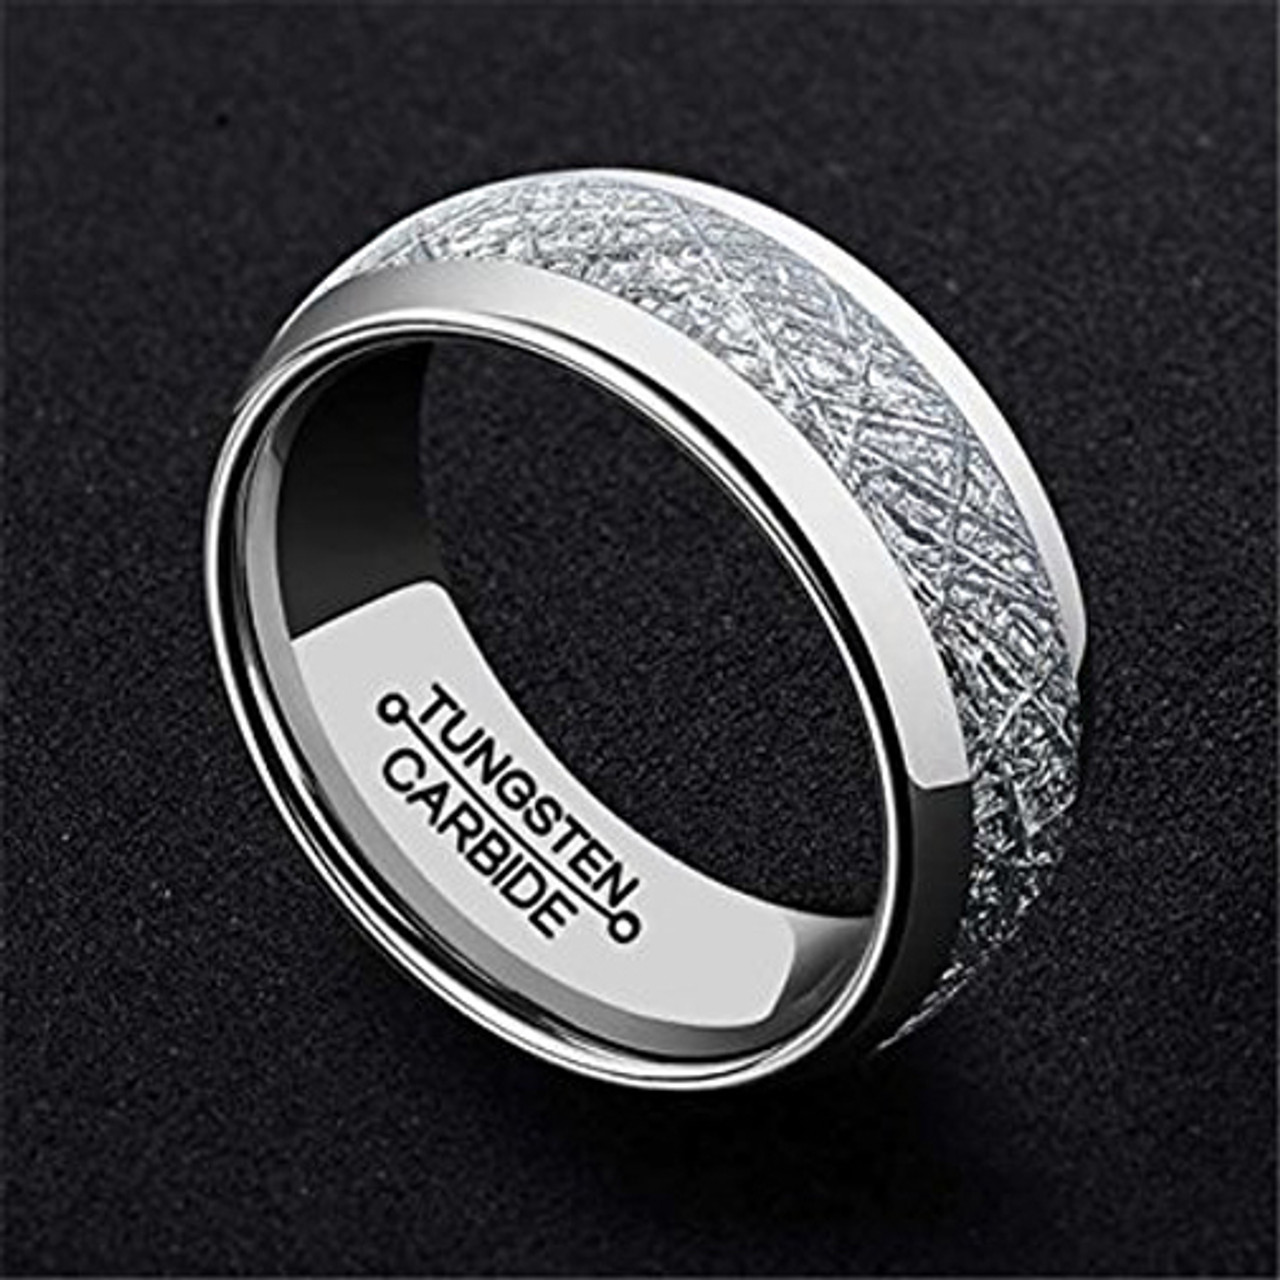 Women's or Men's Tungsten Wedding Band (8mm). Silver Tone Ring with Inspired Meteorite. Domed Top Tungsten Carbide Comfort Fit.